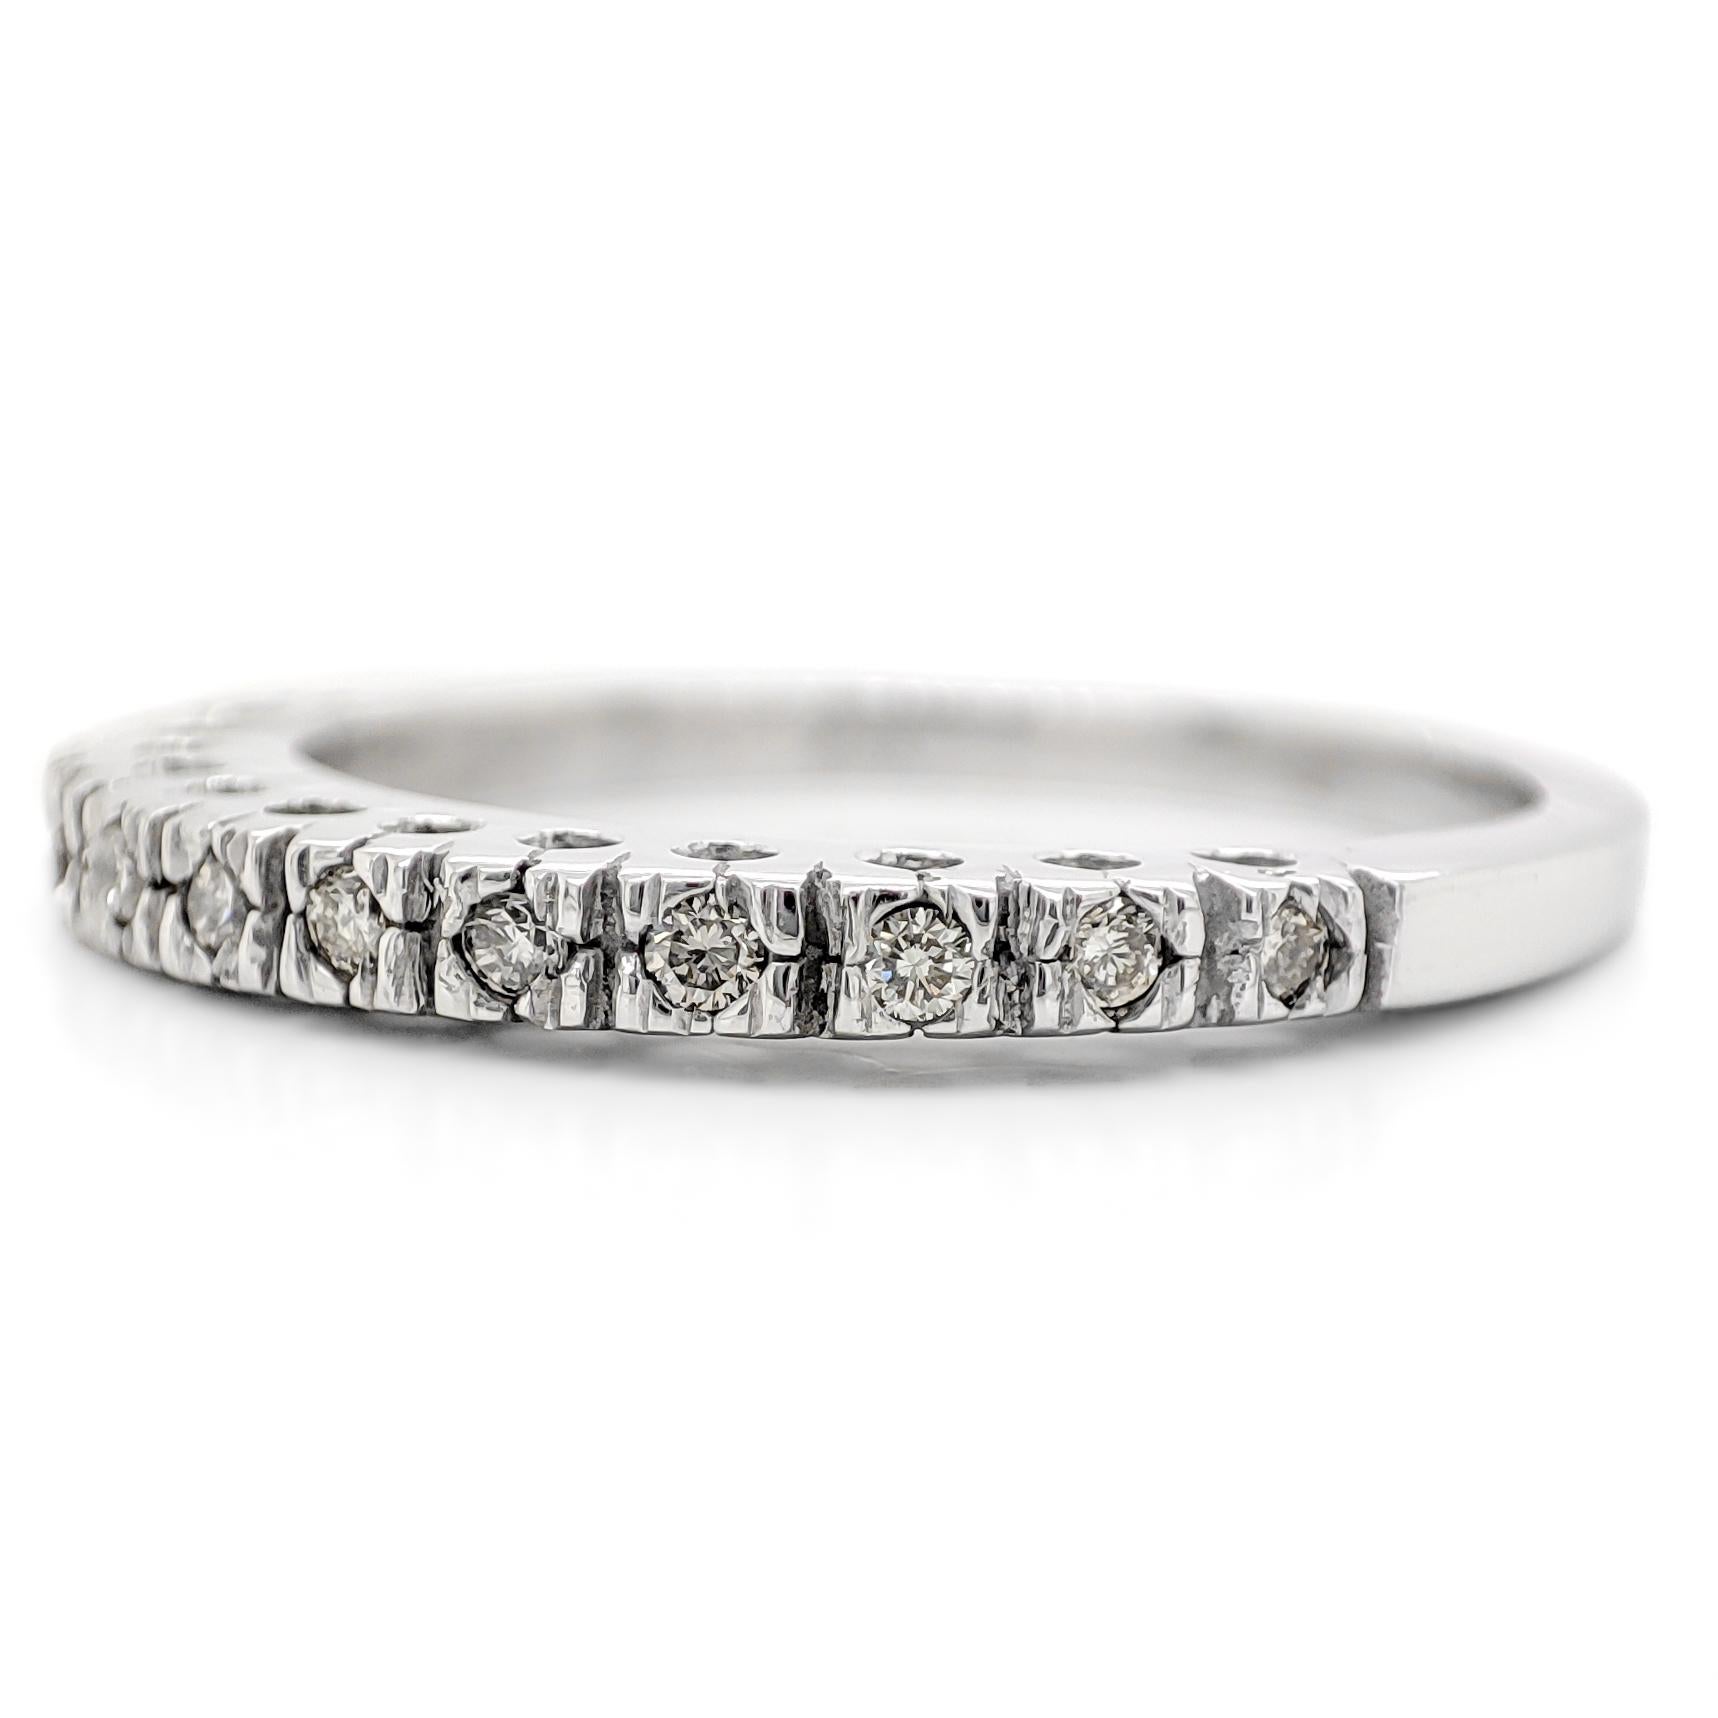 FOR US CUSTOMER NO VAT!
This elegant ring features a 0.14 carat diamond set in a 14K white gold band. The diamond boasts exceptional clarity, falling within the VVS2 to VS2 range, ensuring a breathtaking sparkle.

Crafted with precision, the ring